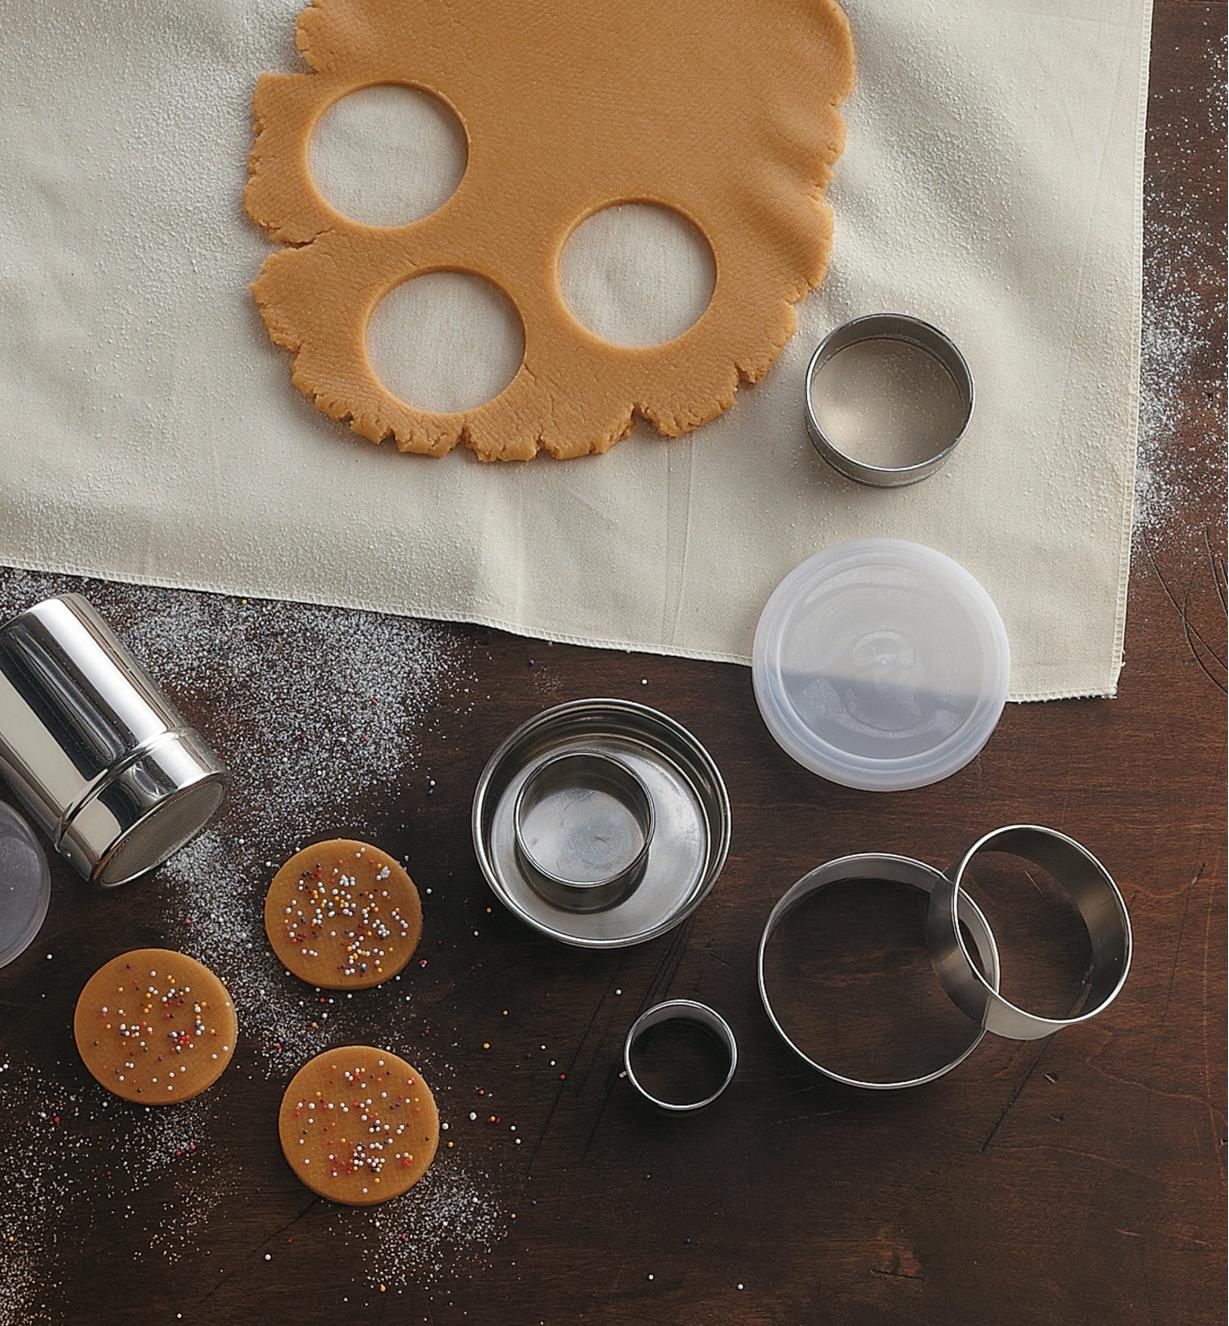 Stainless Steel Pastry Cutters being used to cut cookies from rolled-out dough